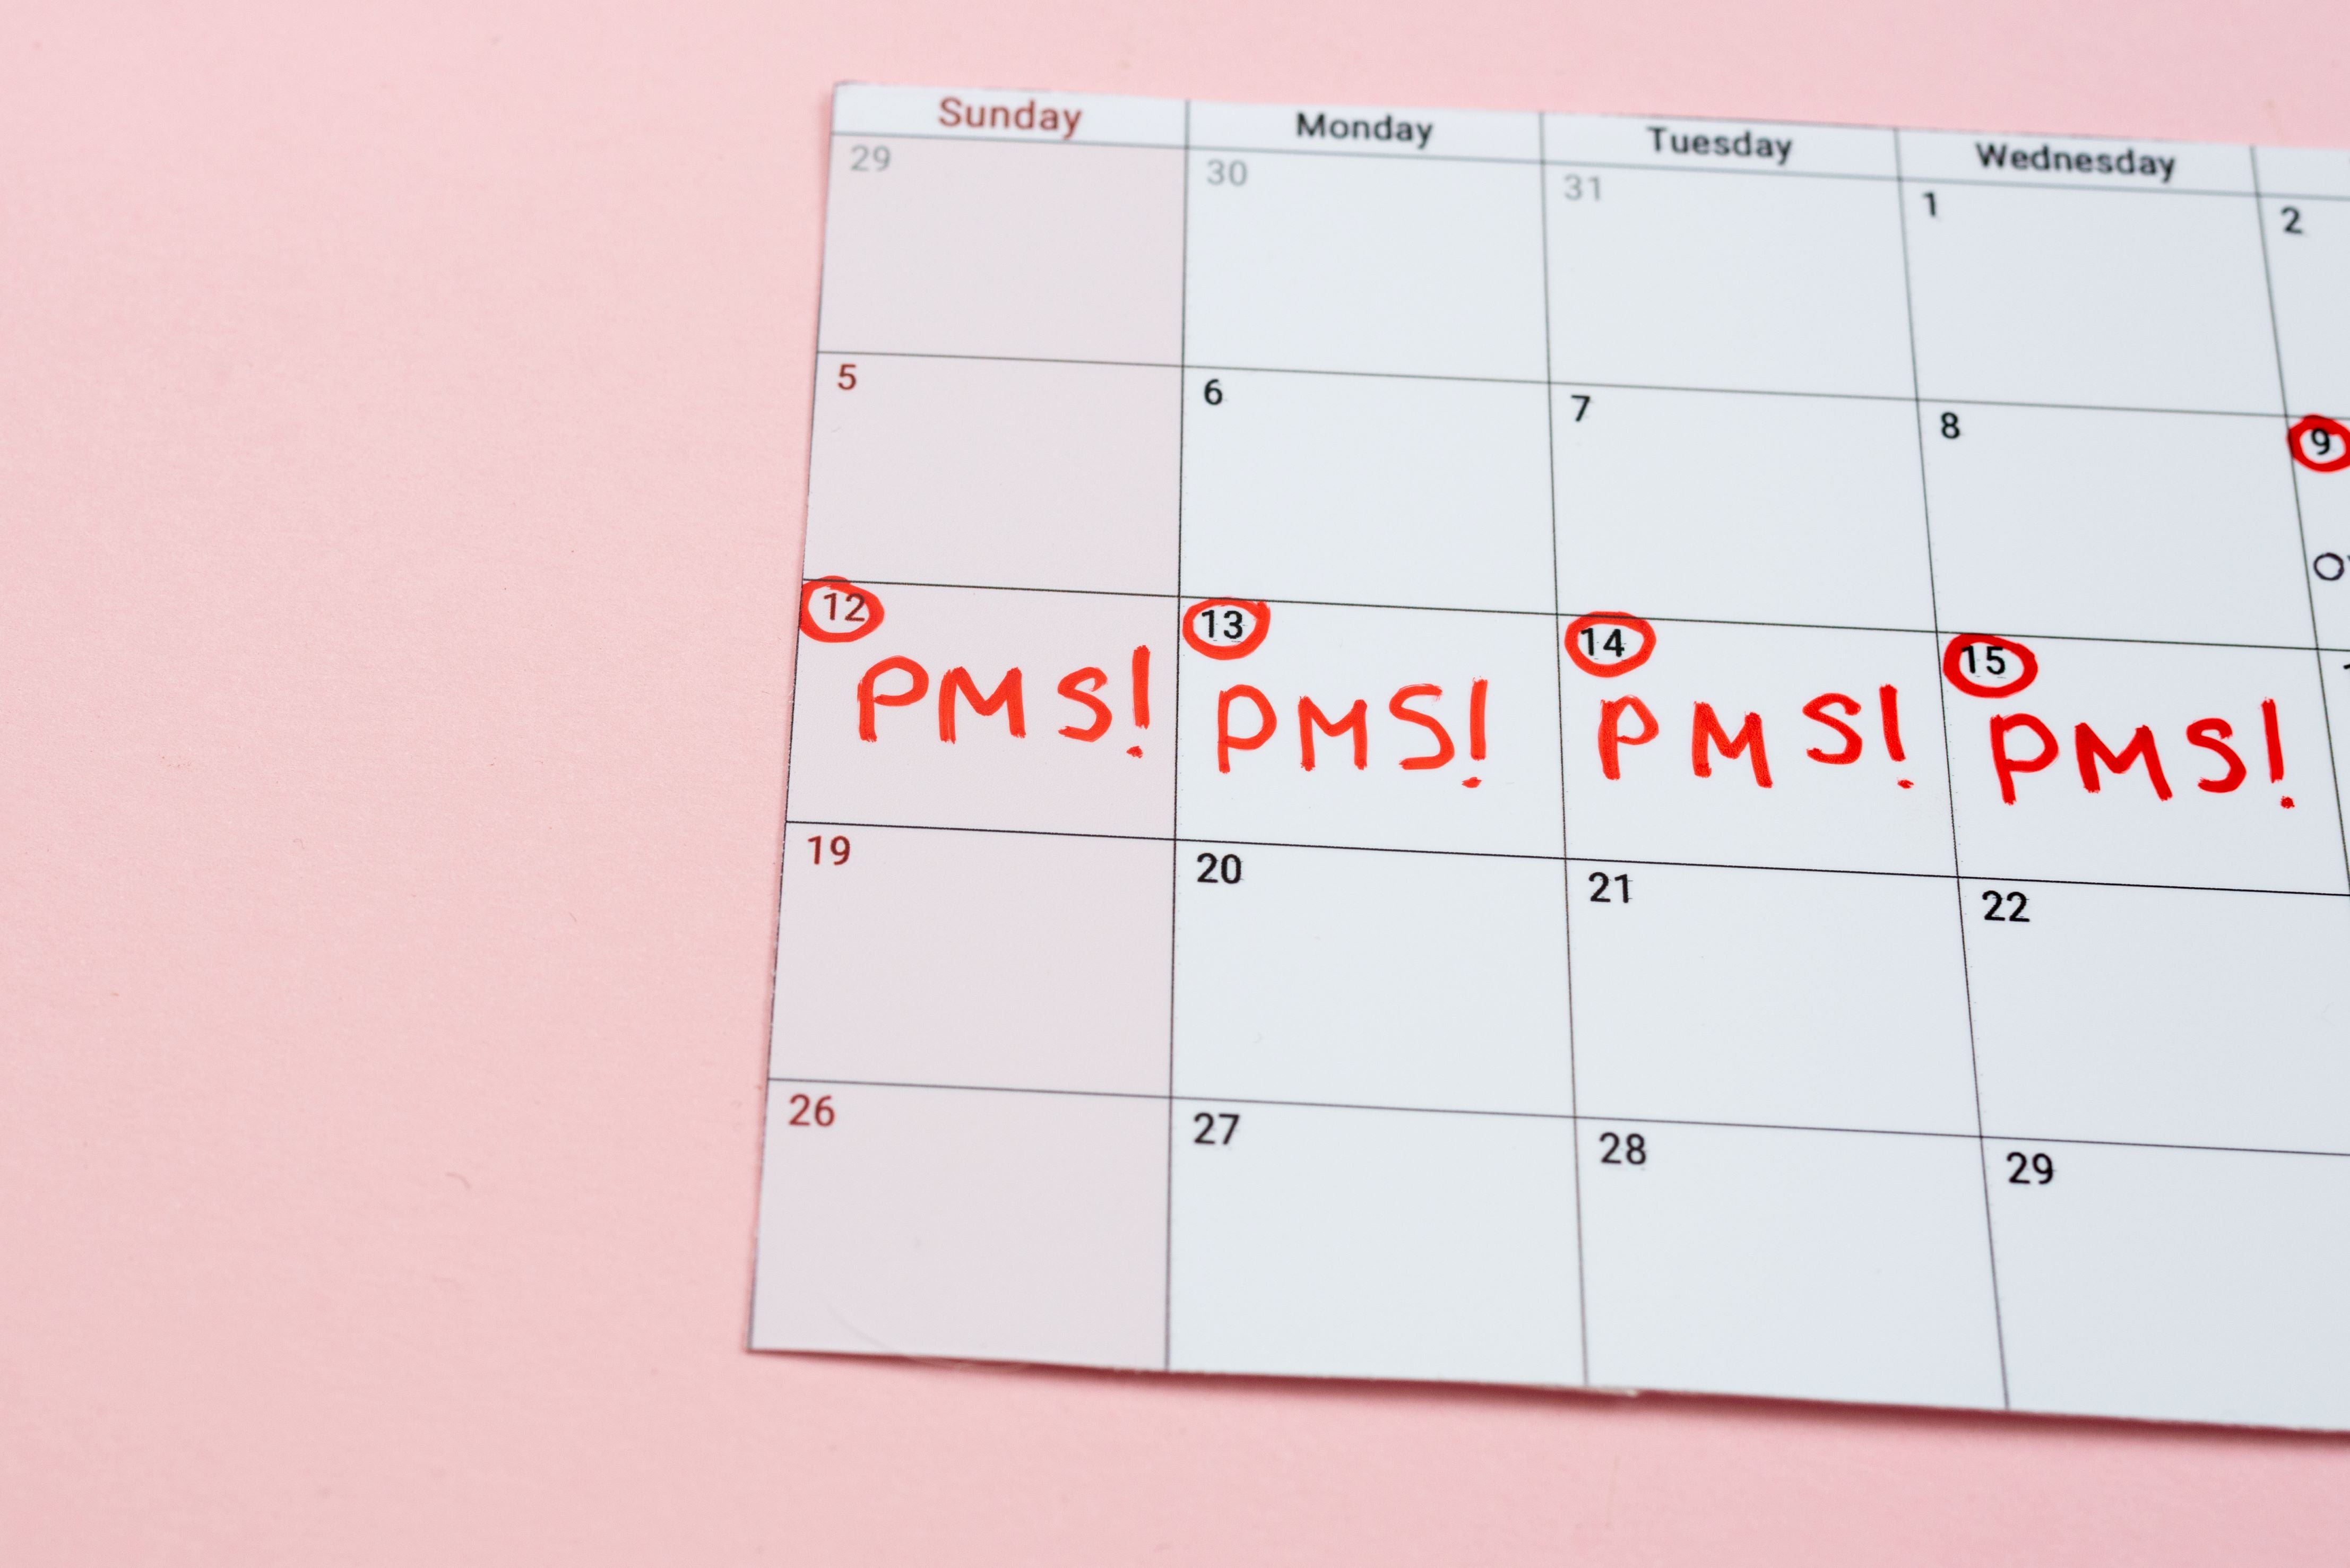 PMS - What can I take for premenstrual/period issues?